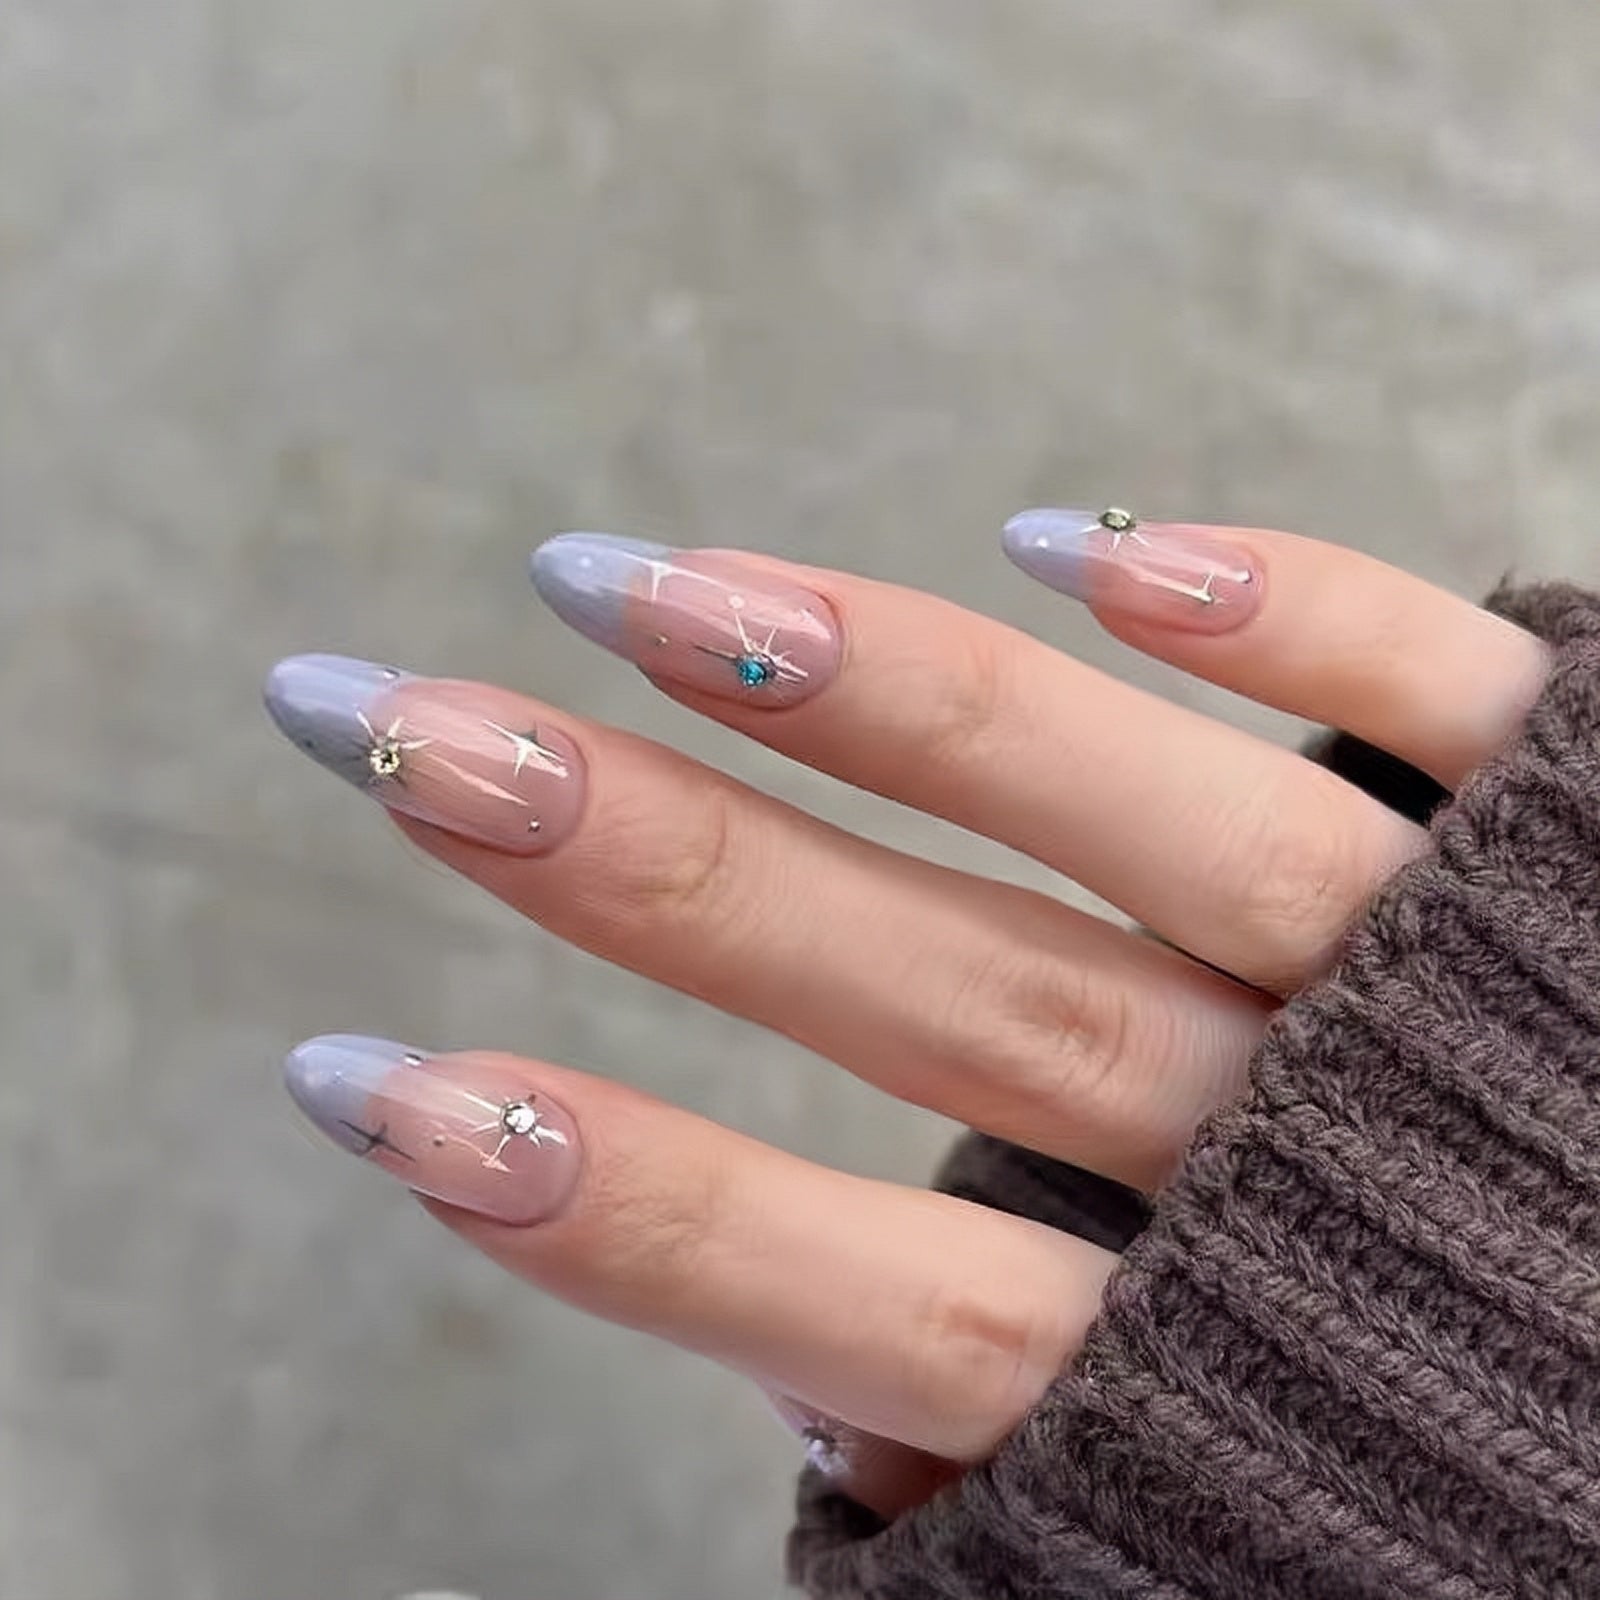 Exquisite Handcrafted Transparent Lavender French Press-On Nails False Nails from SHOPQAQ